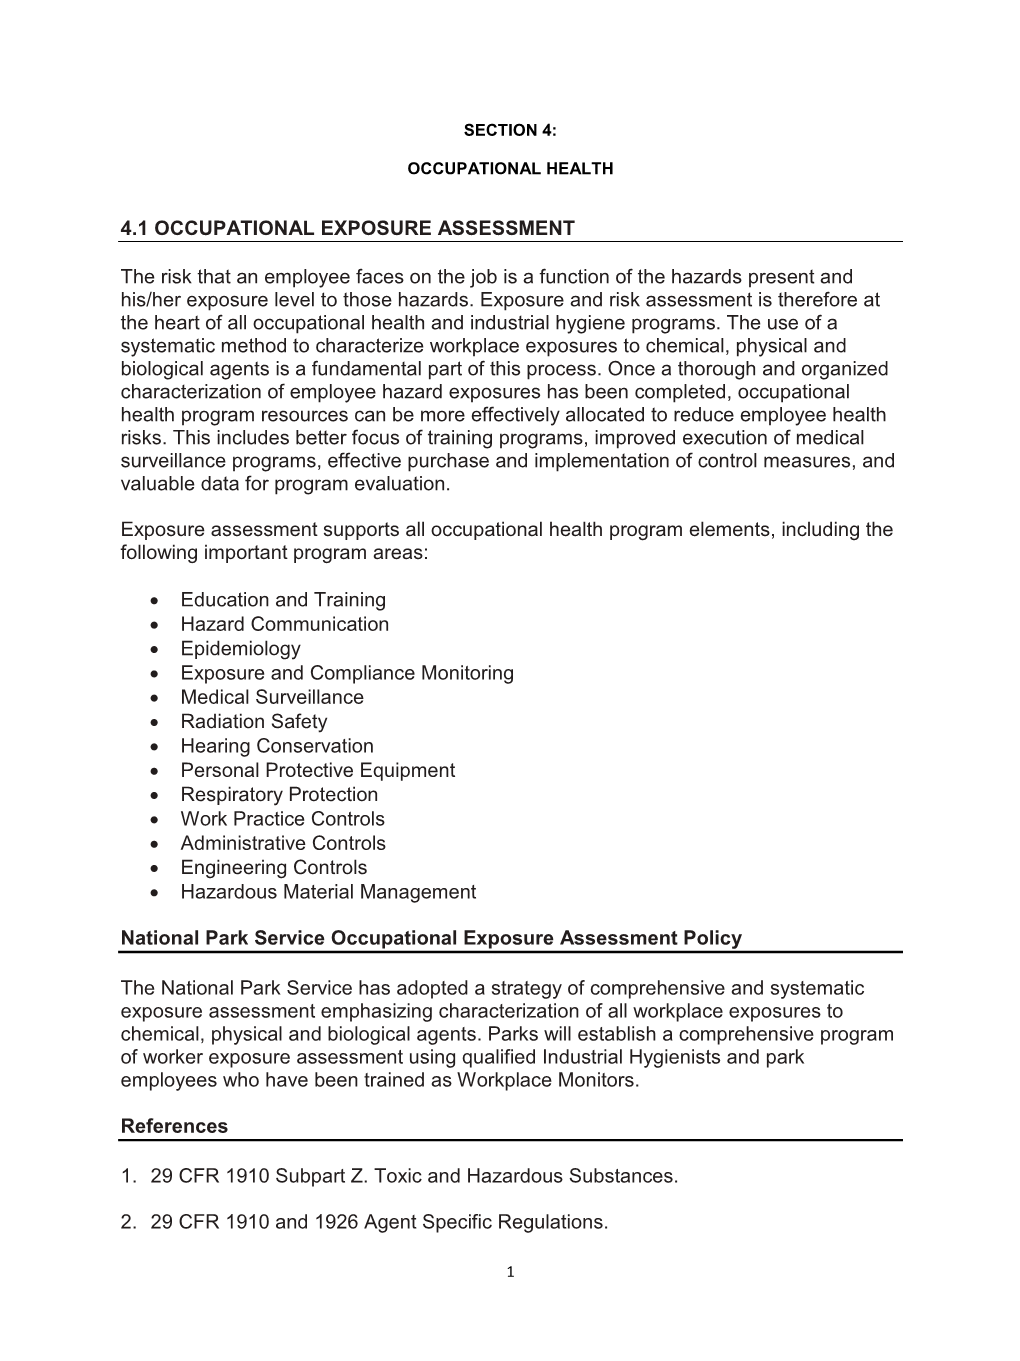 Occupational Exposure Assessment